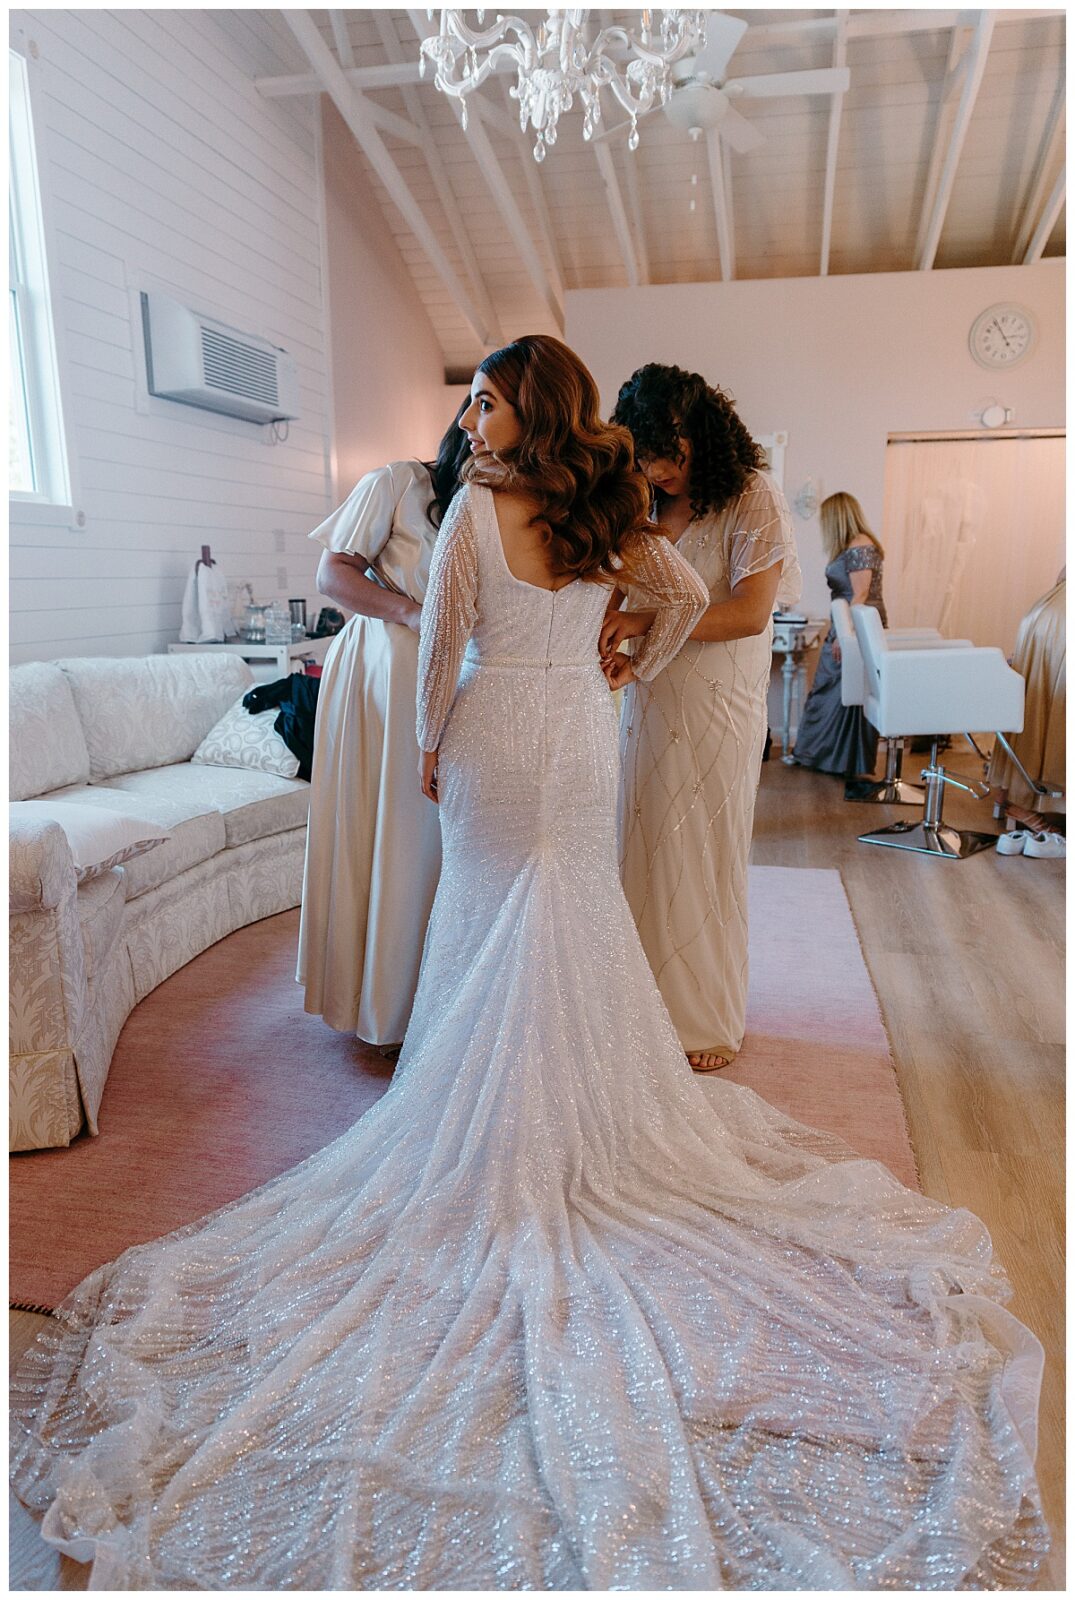 family help bride put on gown by North Carolina wedding photographer